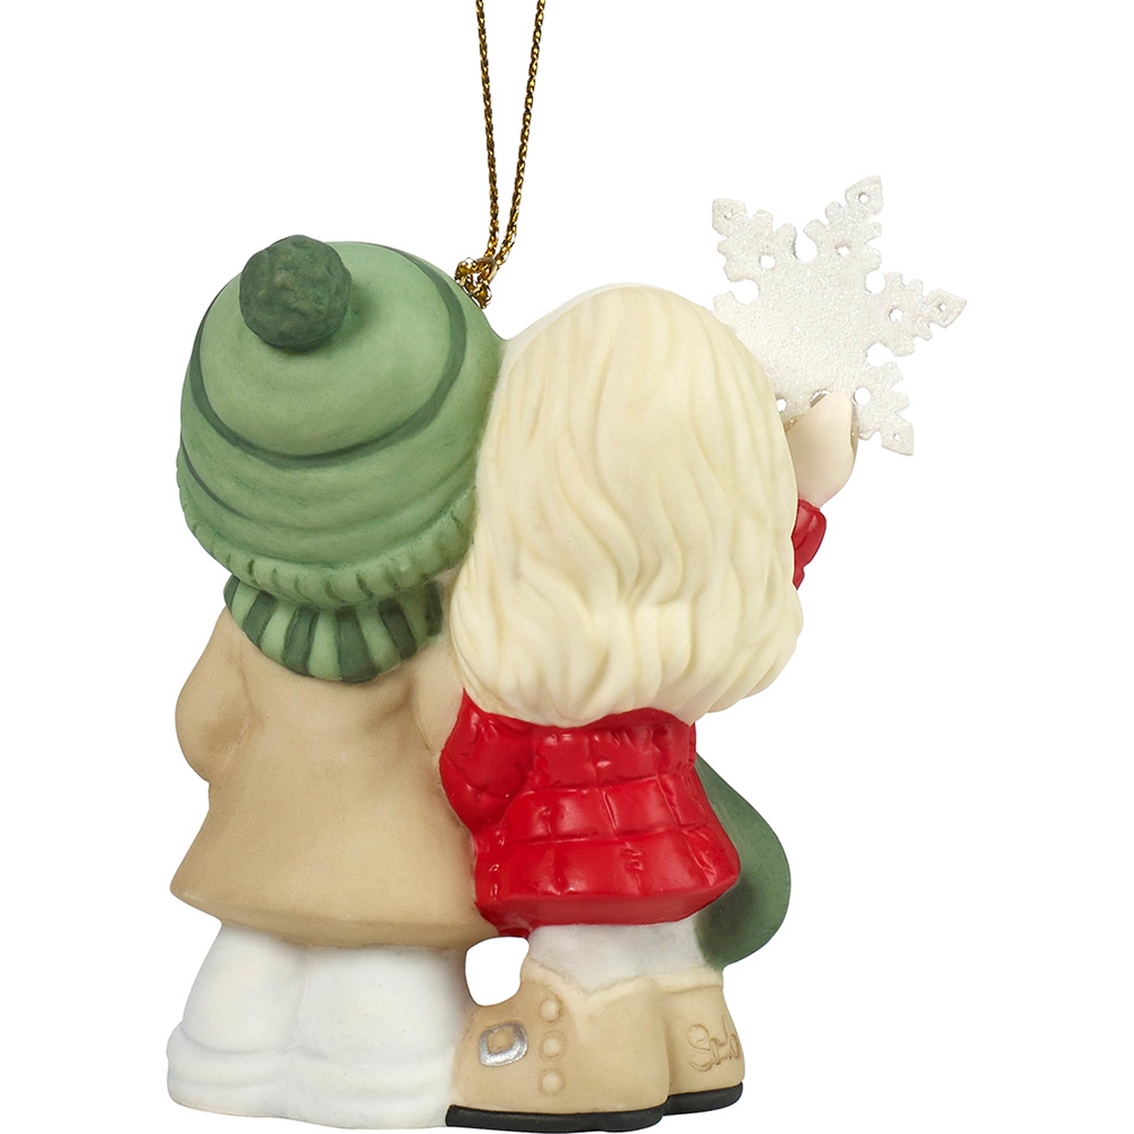 Precious Moments 2018 Baby Boy Ornament - Image 2 of 2